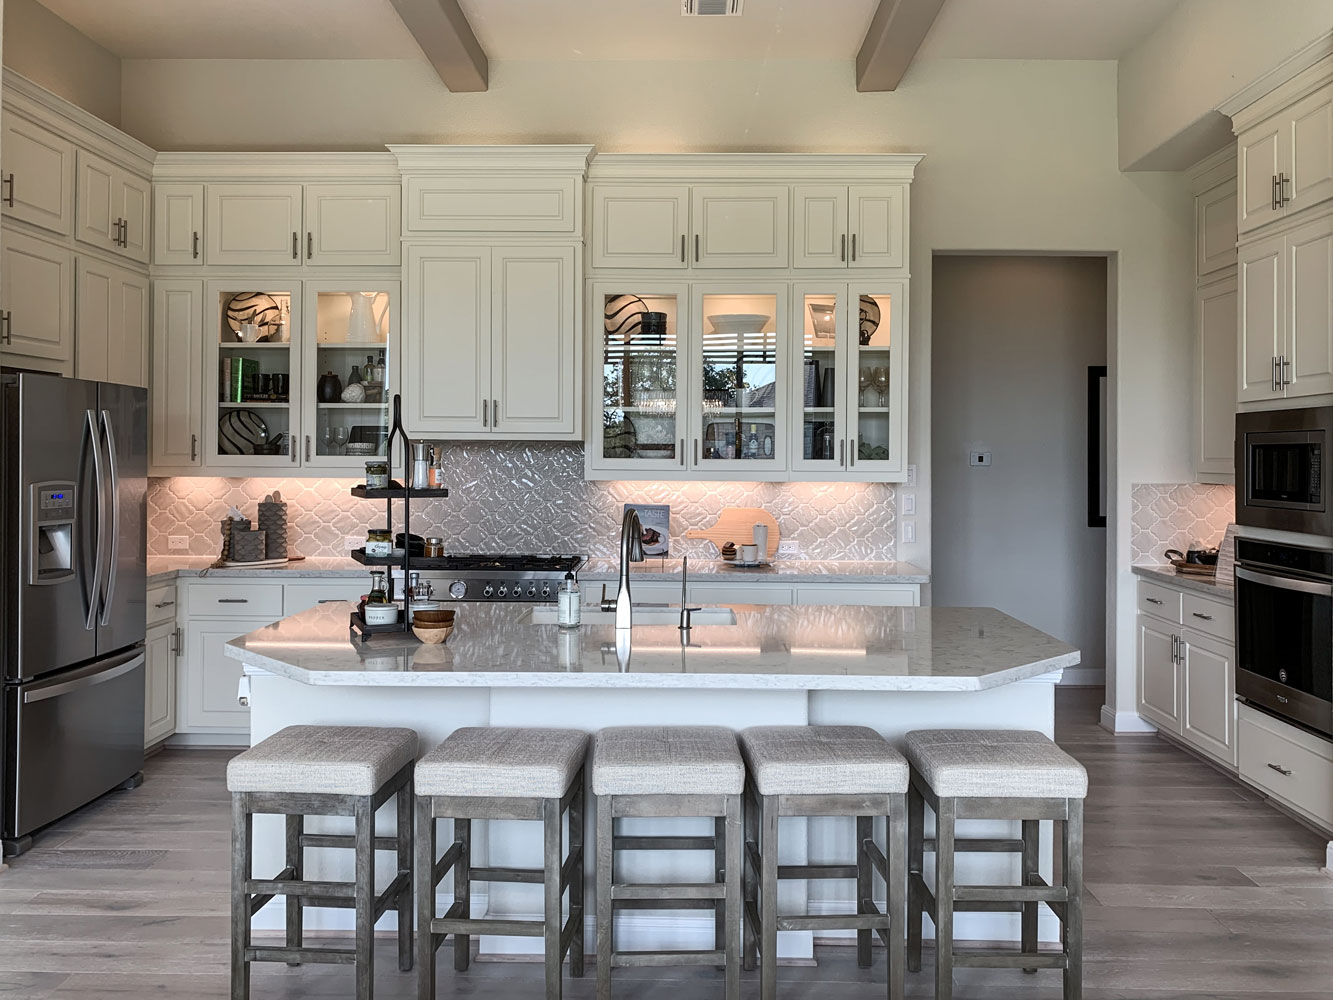 kitchen with raised panel doors in creamy white